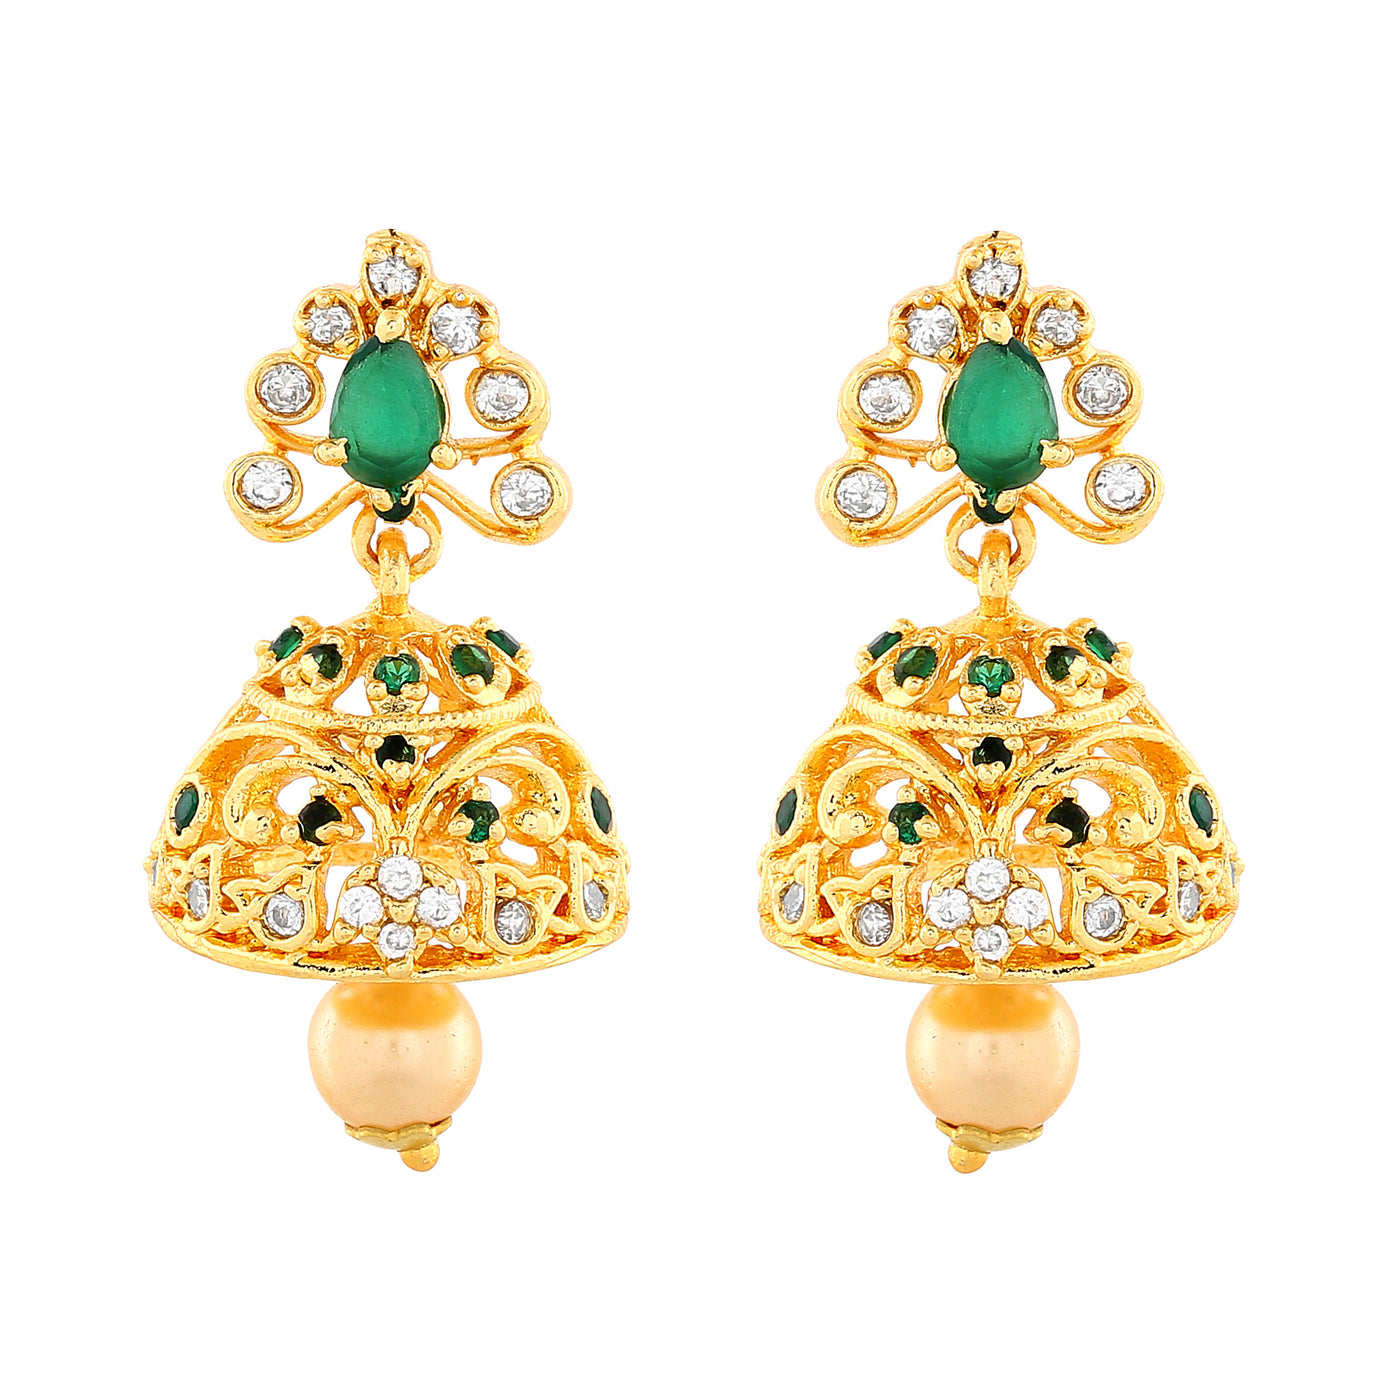 Estele Gold Plated CZ Splendid Jhumki Earrings with Pearl & Green Crystals for Women